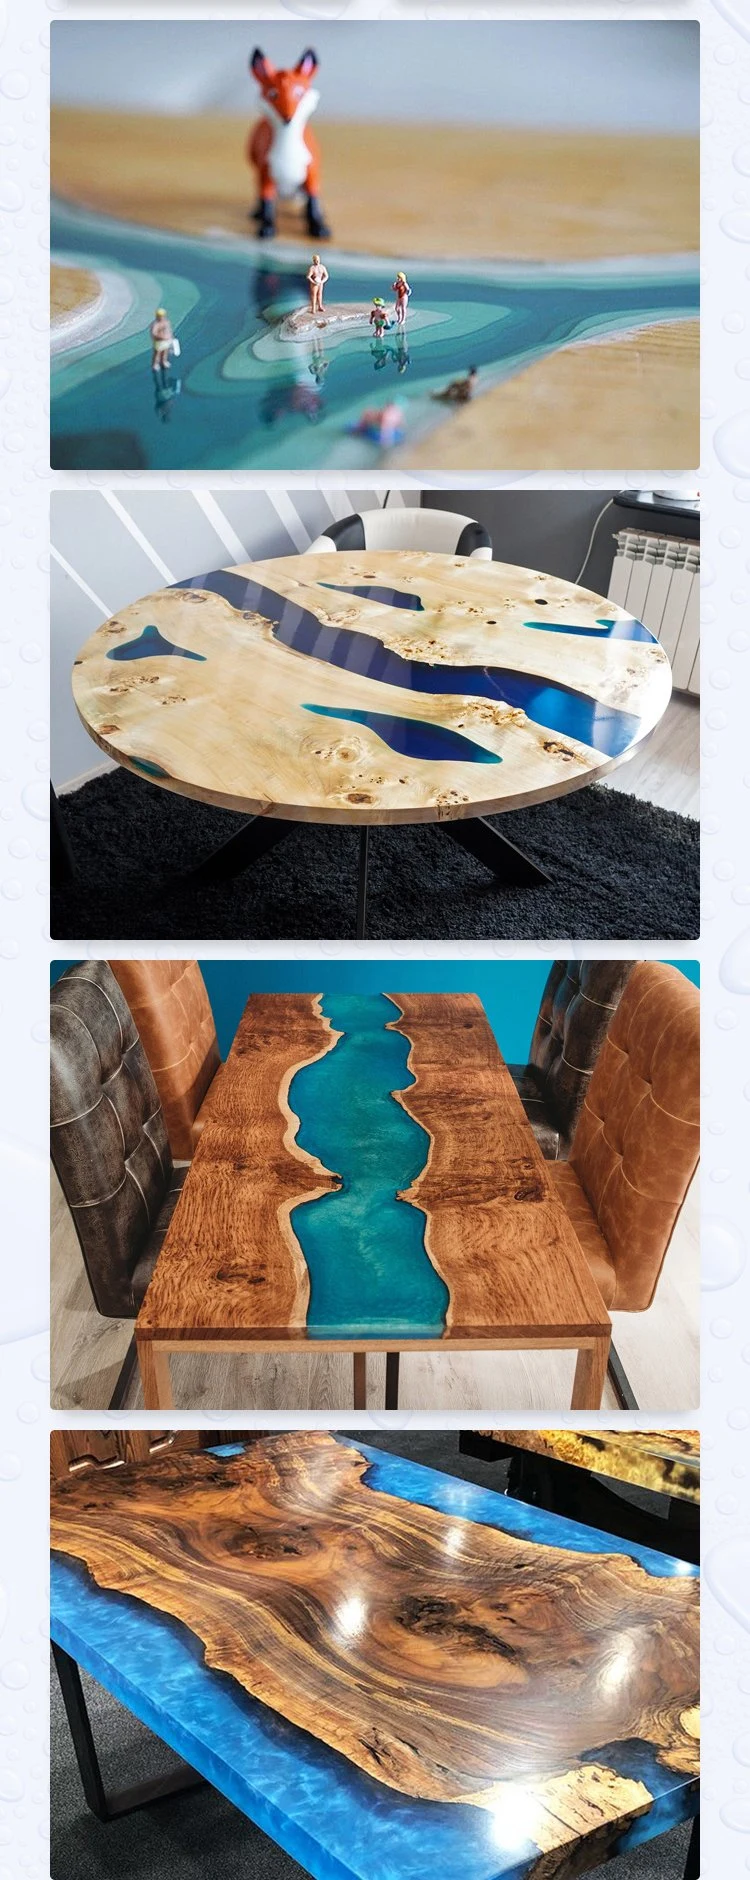 Epoxy Resin Table Resin Wood Epoxy Table Coffee Table Wood Filled with Epoxy Resin